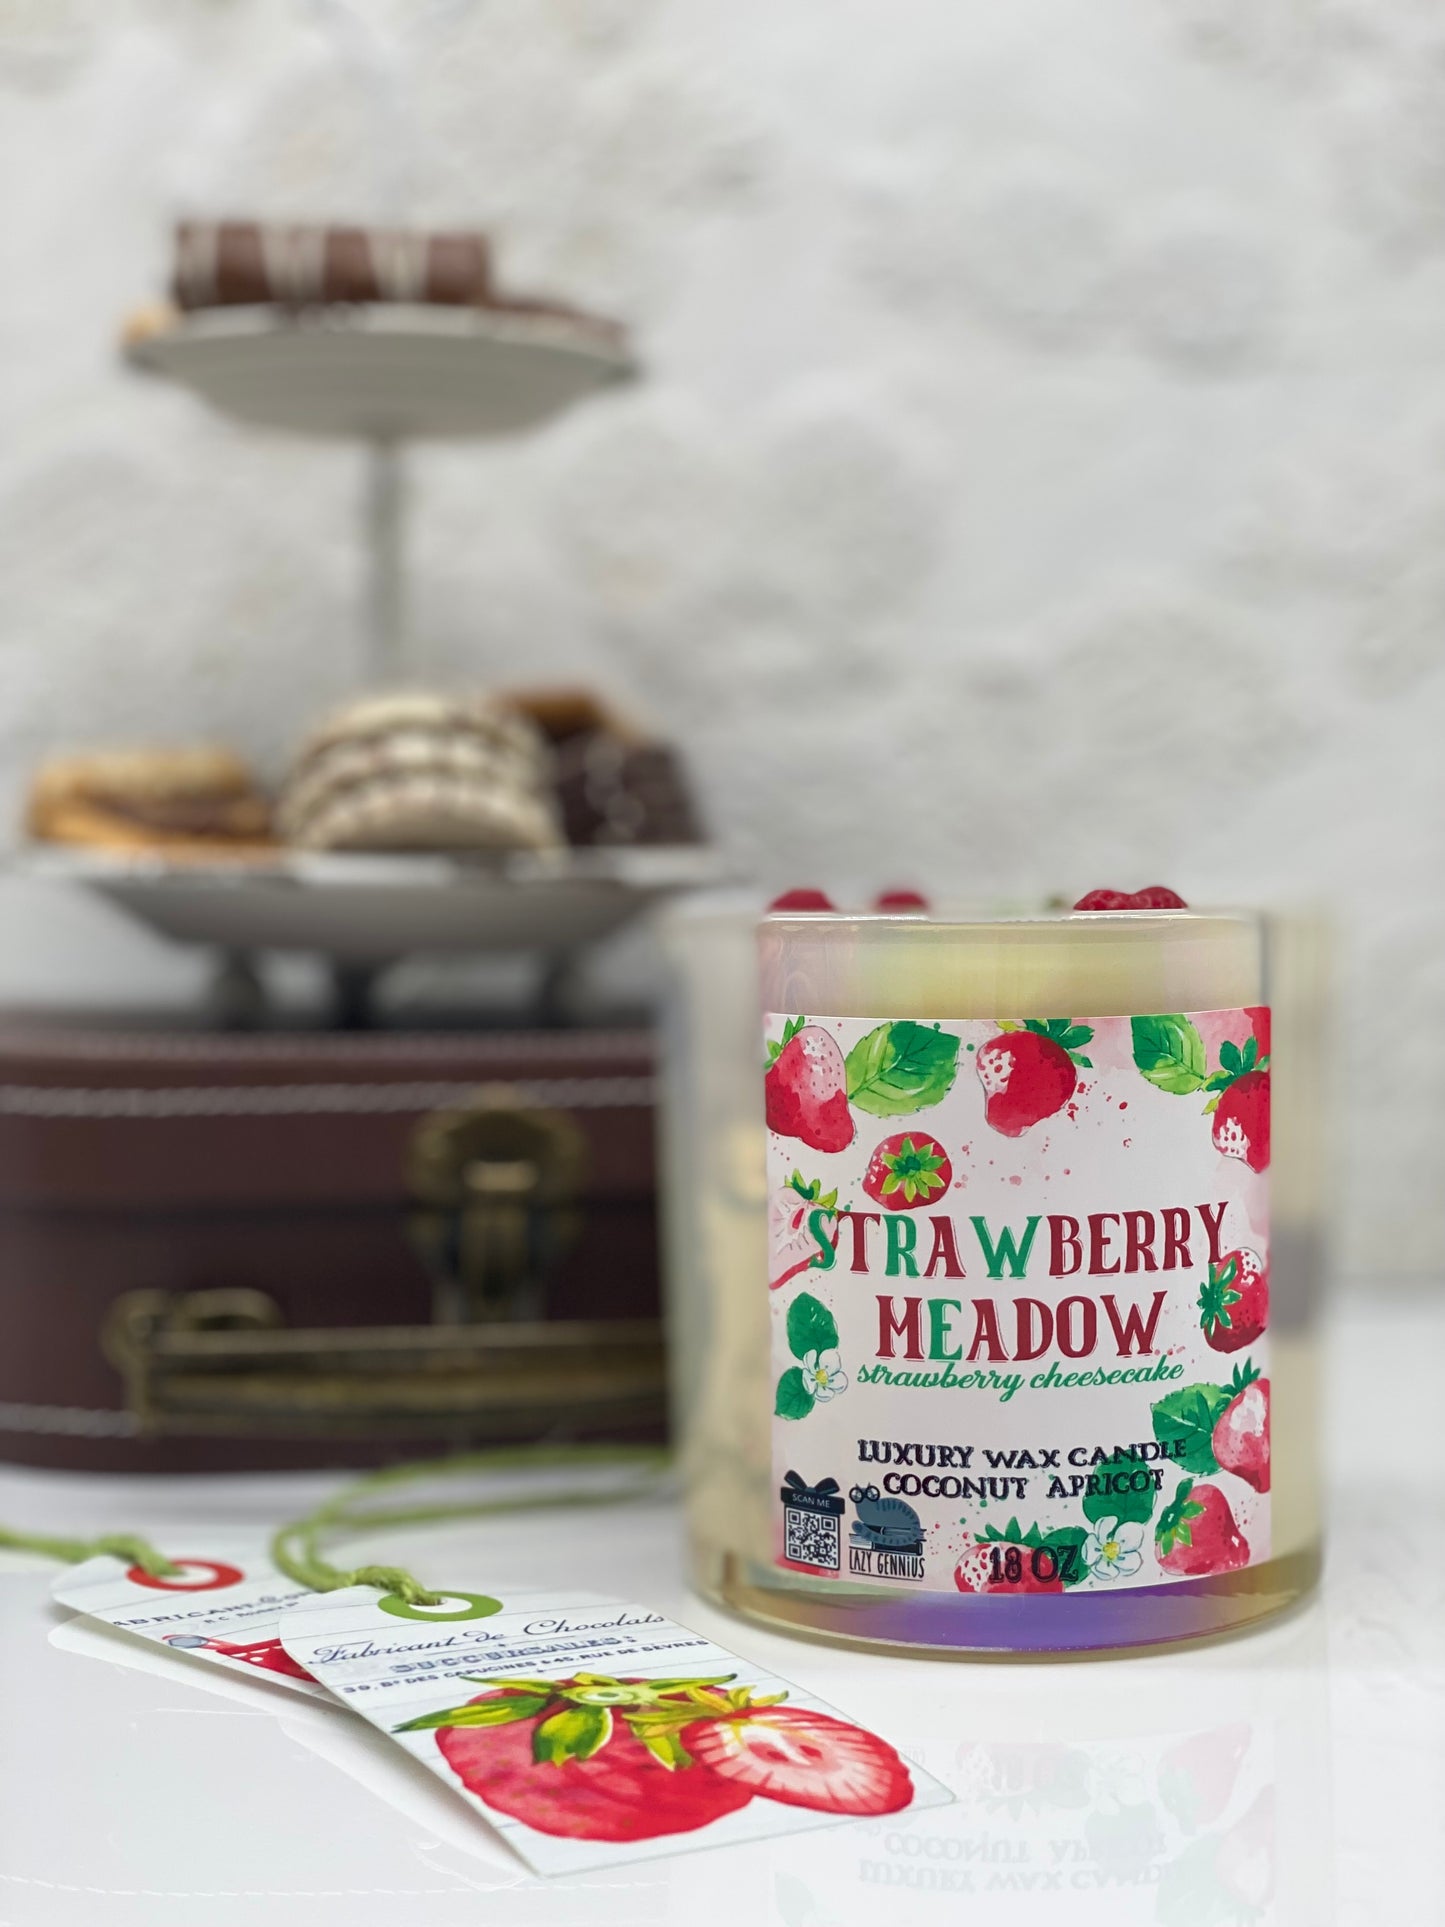 Candle, Coconut APRICOT wax candle, Happy birthday, Strawberry Meadow Scented Candle